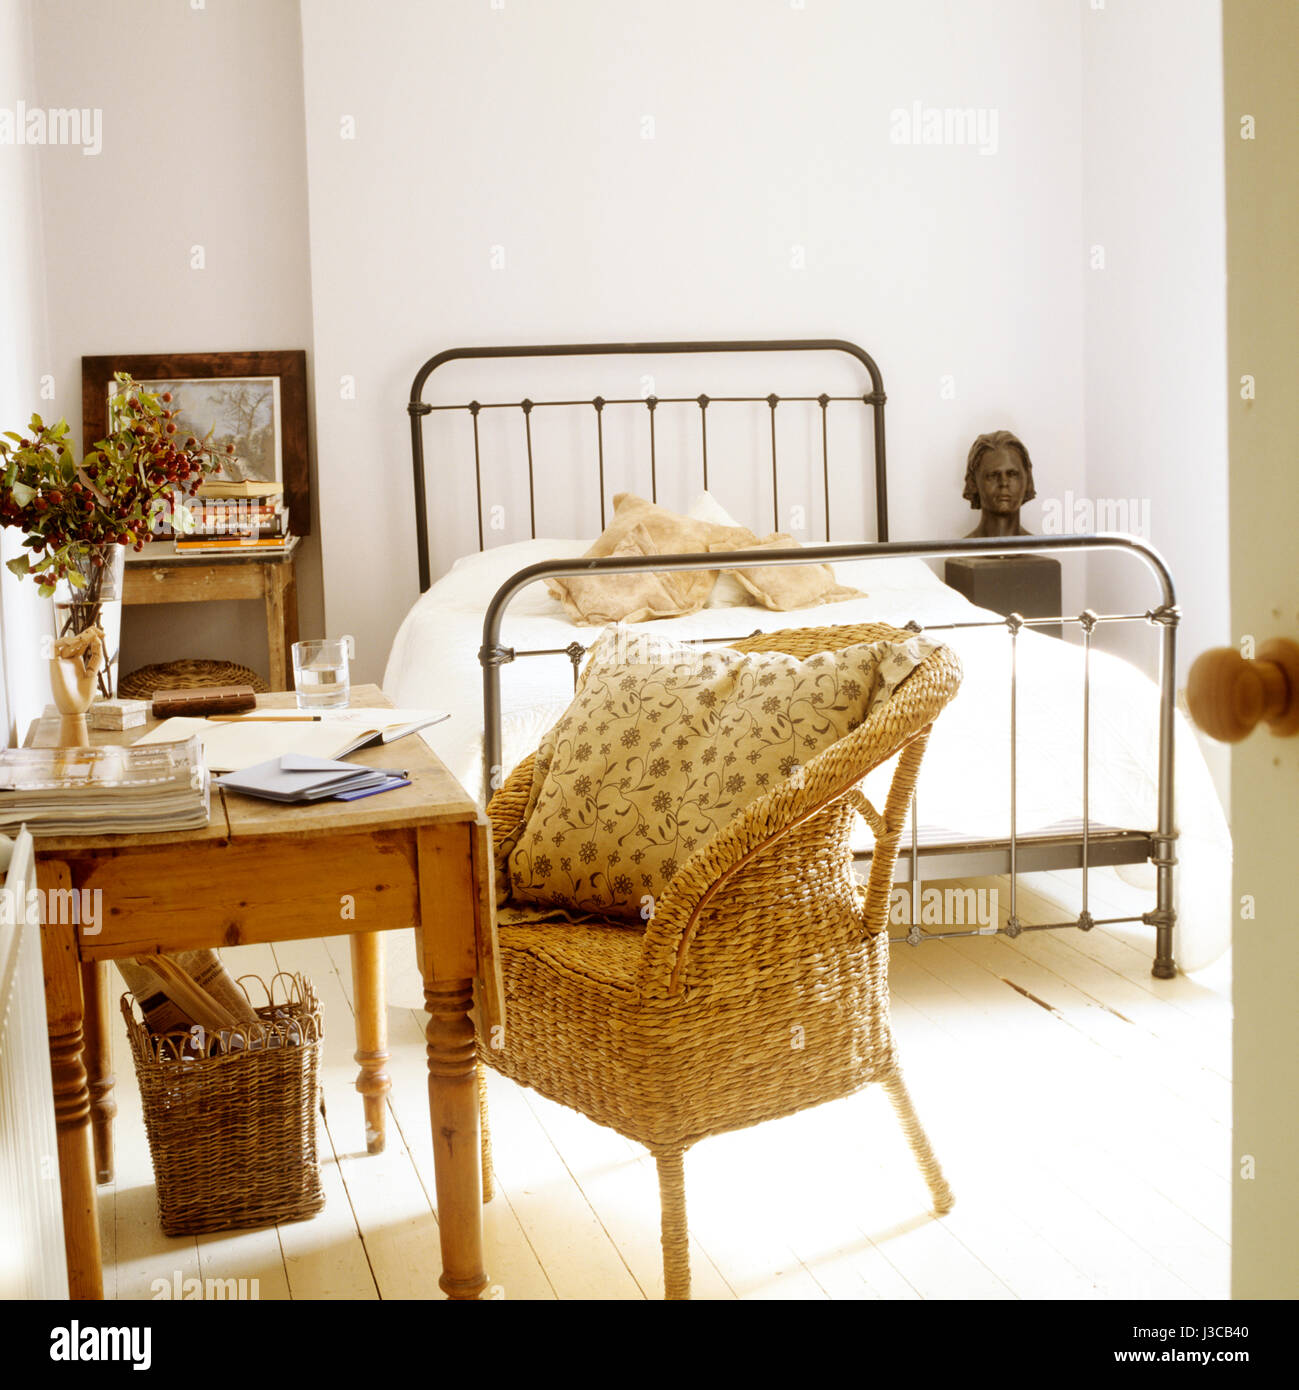 Bedroom with desk and wicker chair. Stock Photo